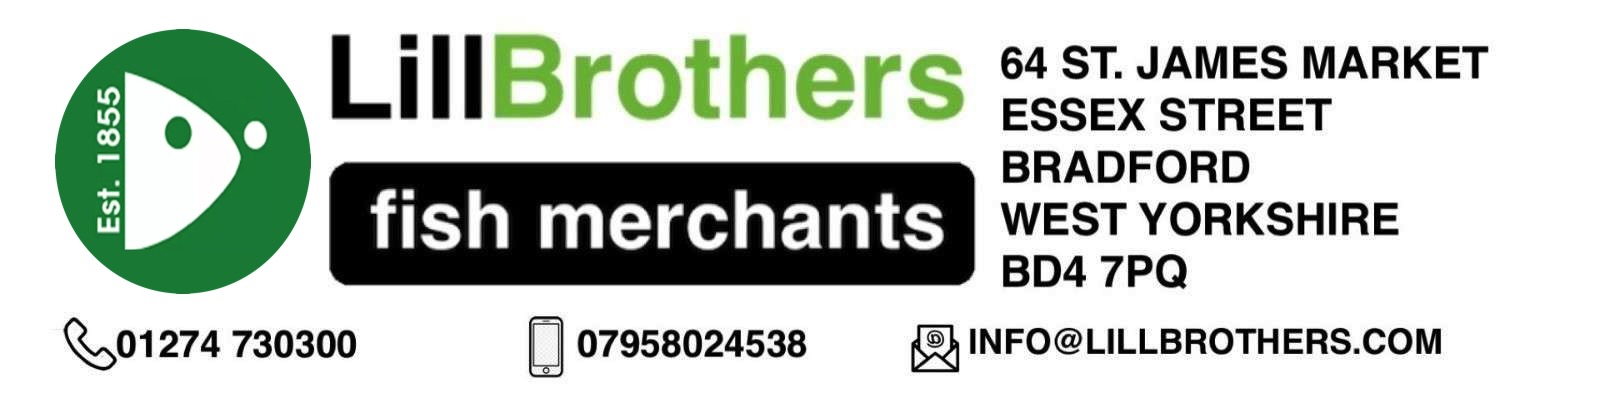 Lill Brothers Fish Merchants Est 1855 Wholesale Fresh / Frozen Fish and Seafood. 64 ST. JAMES MARKET, ESSEX STREET, BRADFORD, WEST YORKSHIRE, BD47PQ Tel: 01274 730300 Local Home Delivery call today